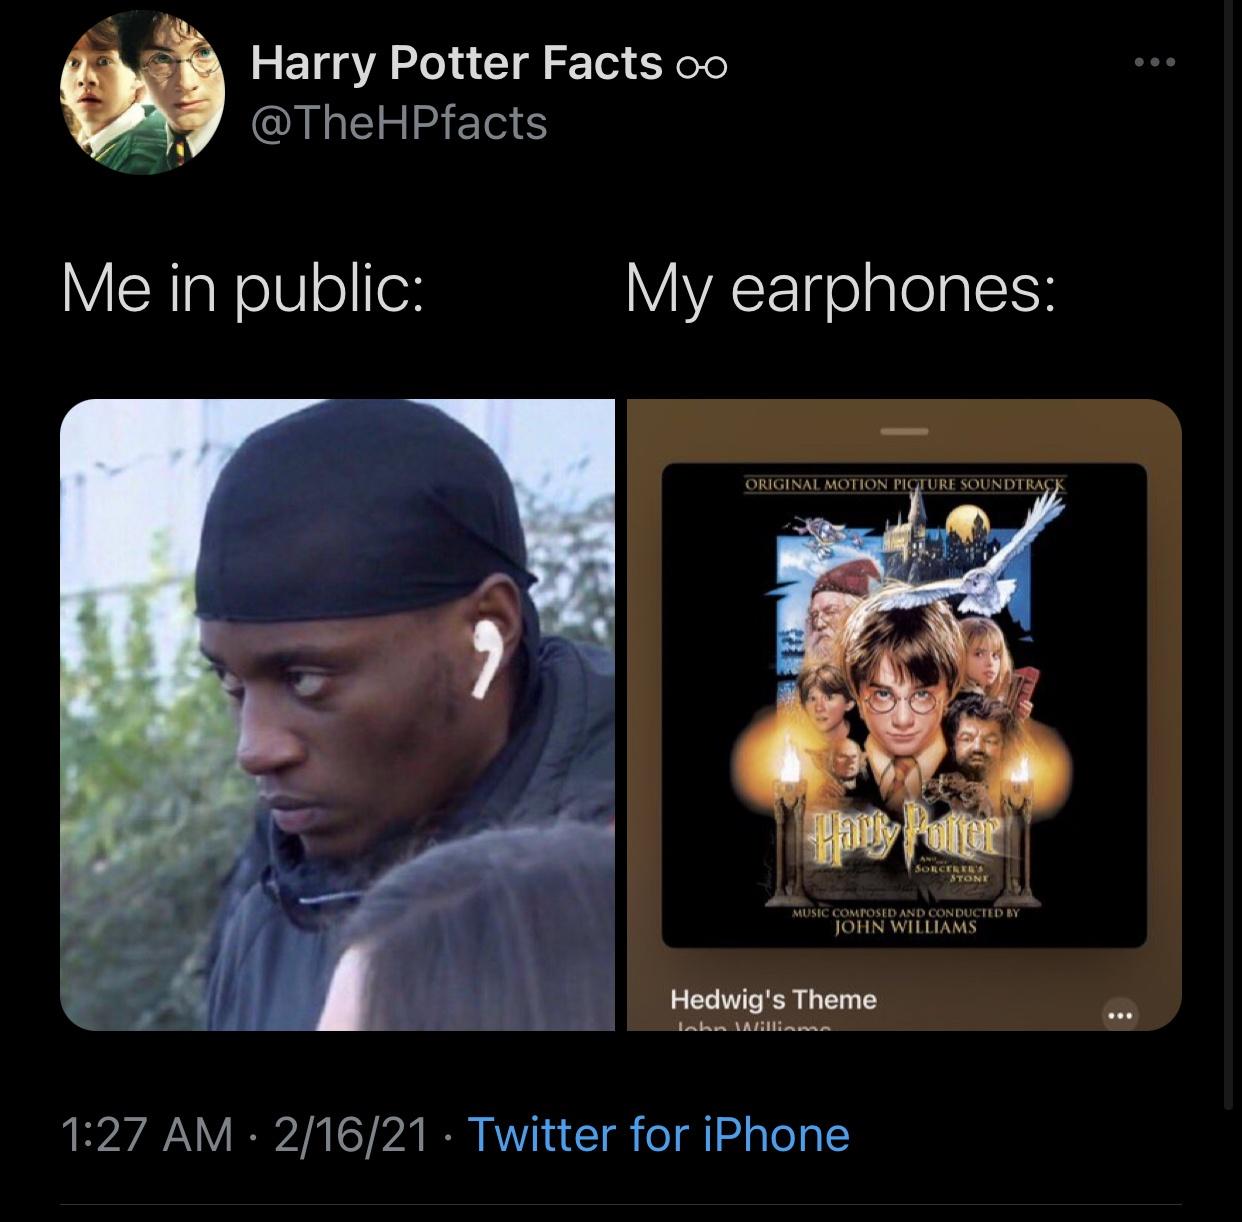 me in public my headphones - Harry Potter Facts oo Me in public My earphones Original Motion Picture Soundtraci Sorcerras Stone Music Composed And Conducted By John Williams Hedwig's Theme 21621 Twitter for iPhone